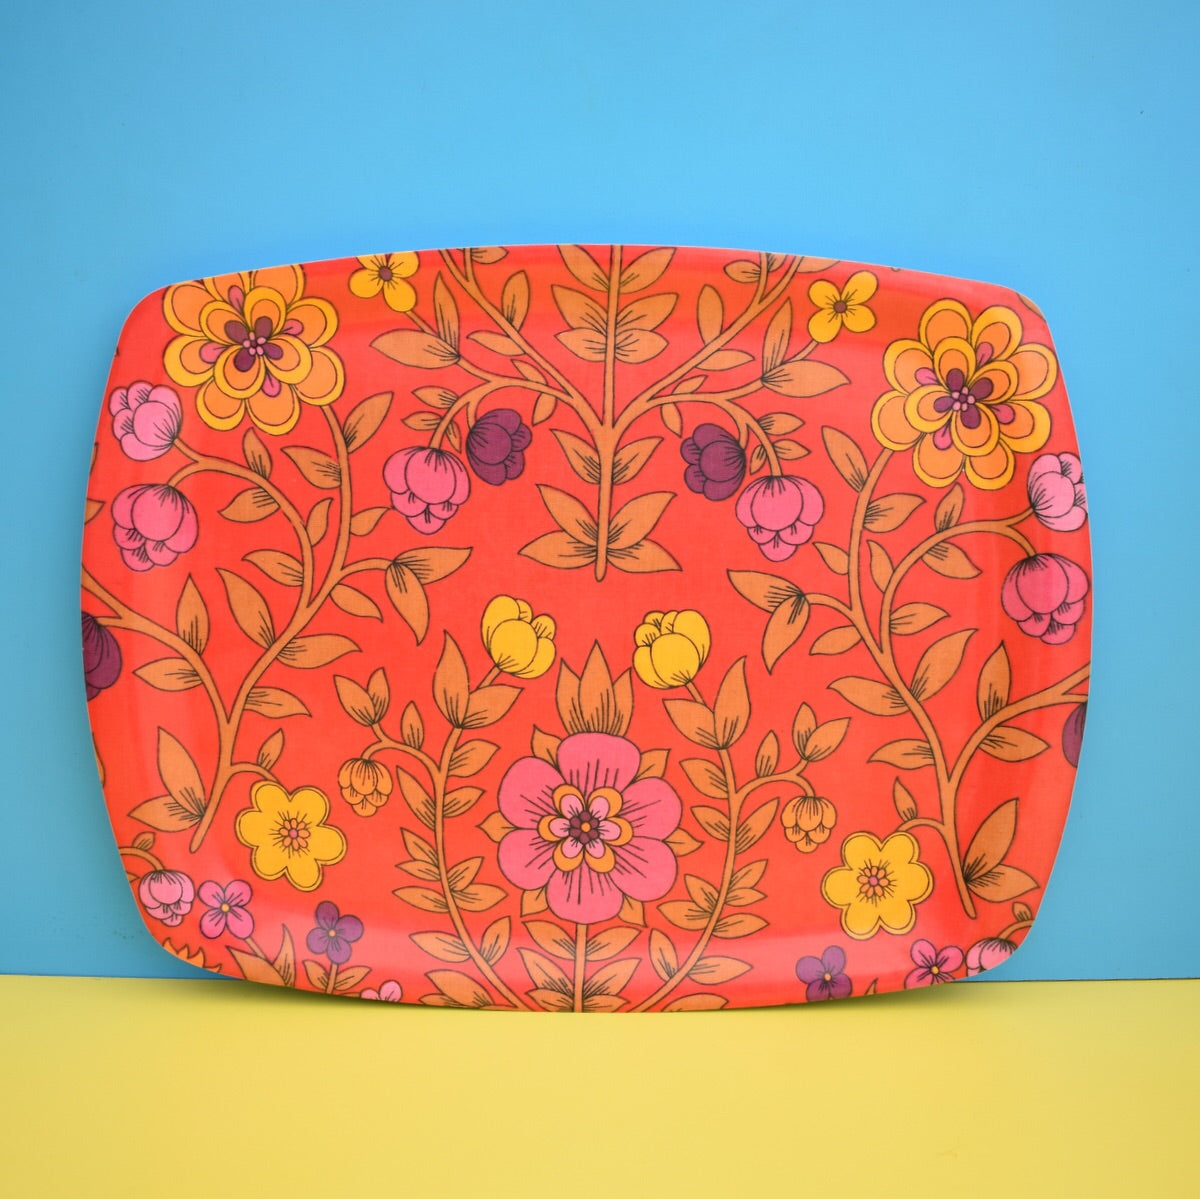 Vintage 1960s Flower Power Thetford Tray - Red